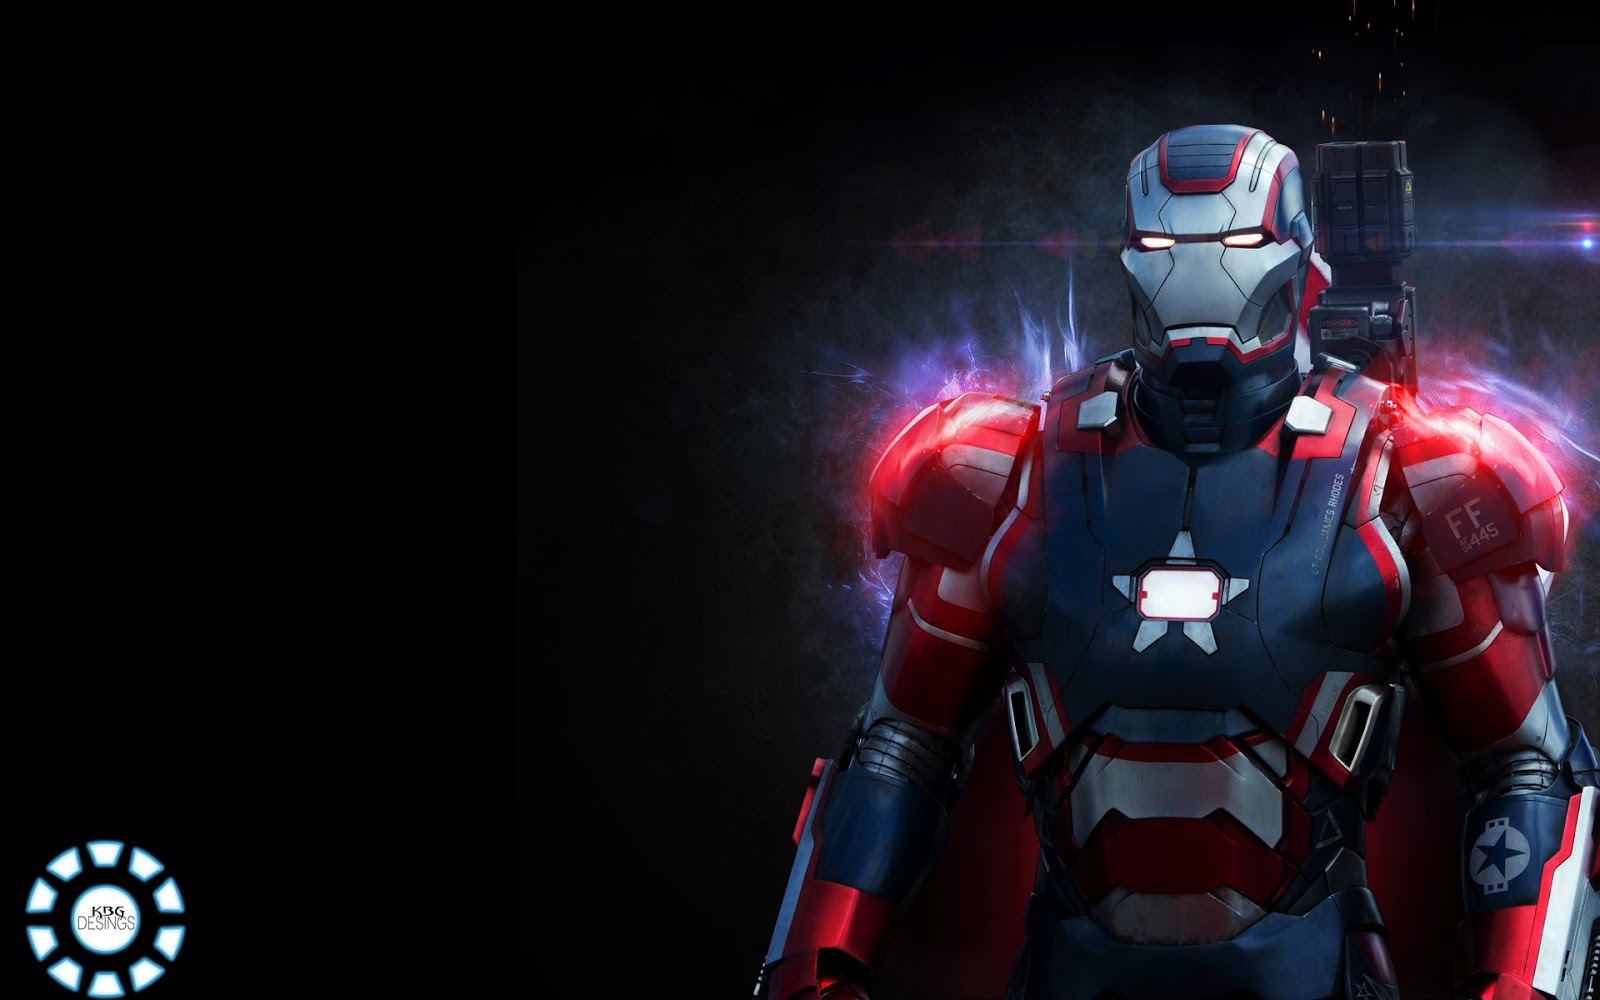  HD  Wallpapers  Iron  Man  3 Wallpapers 